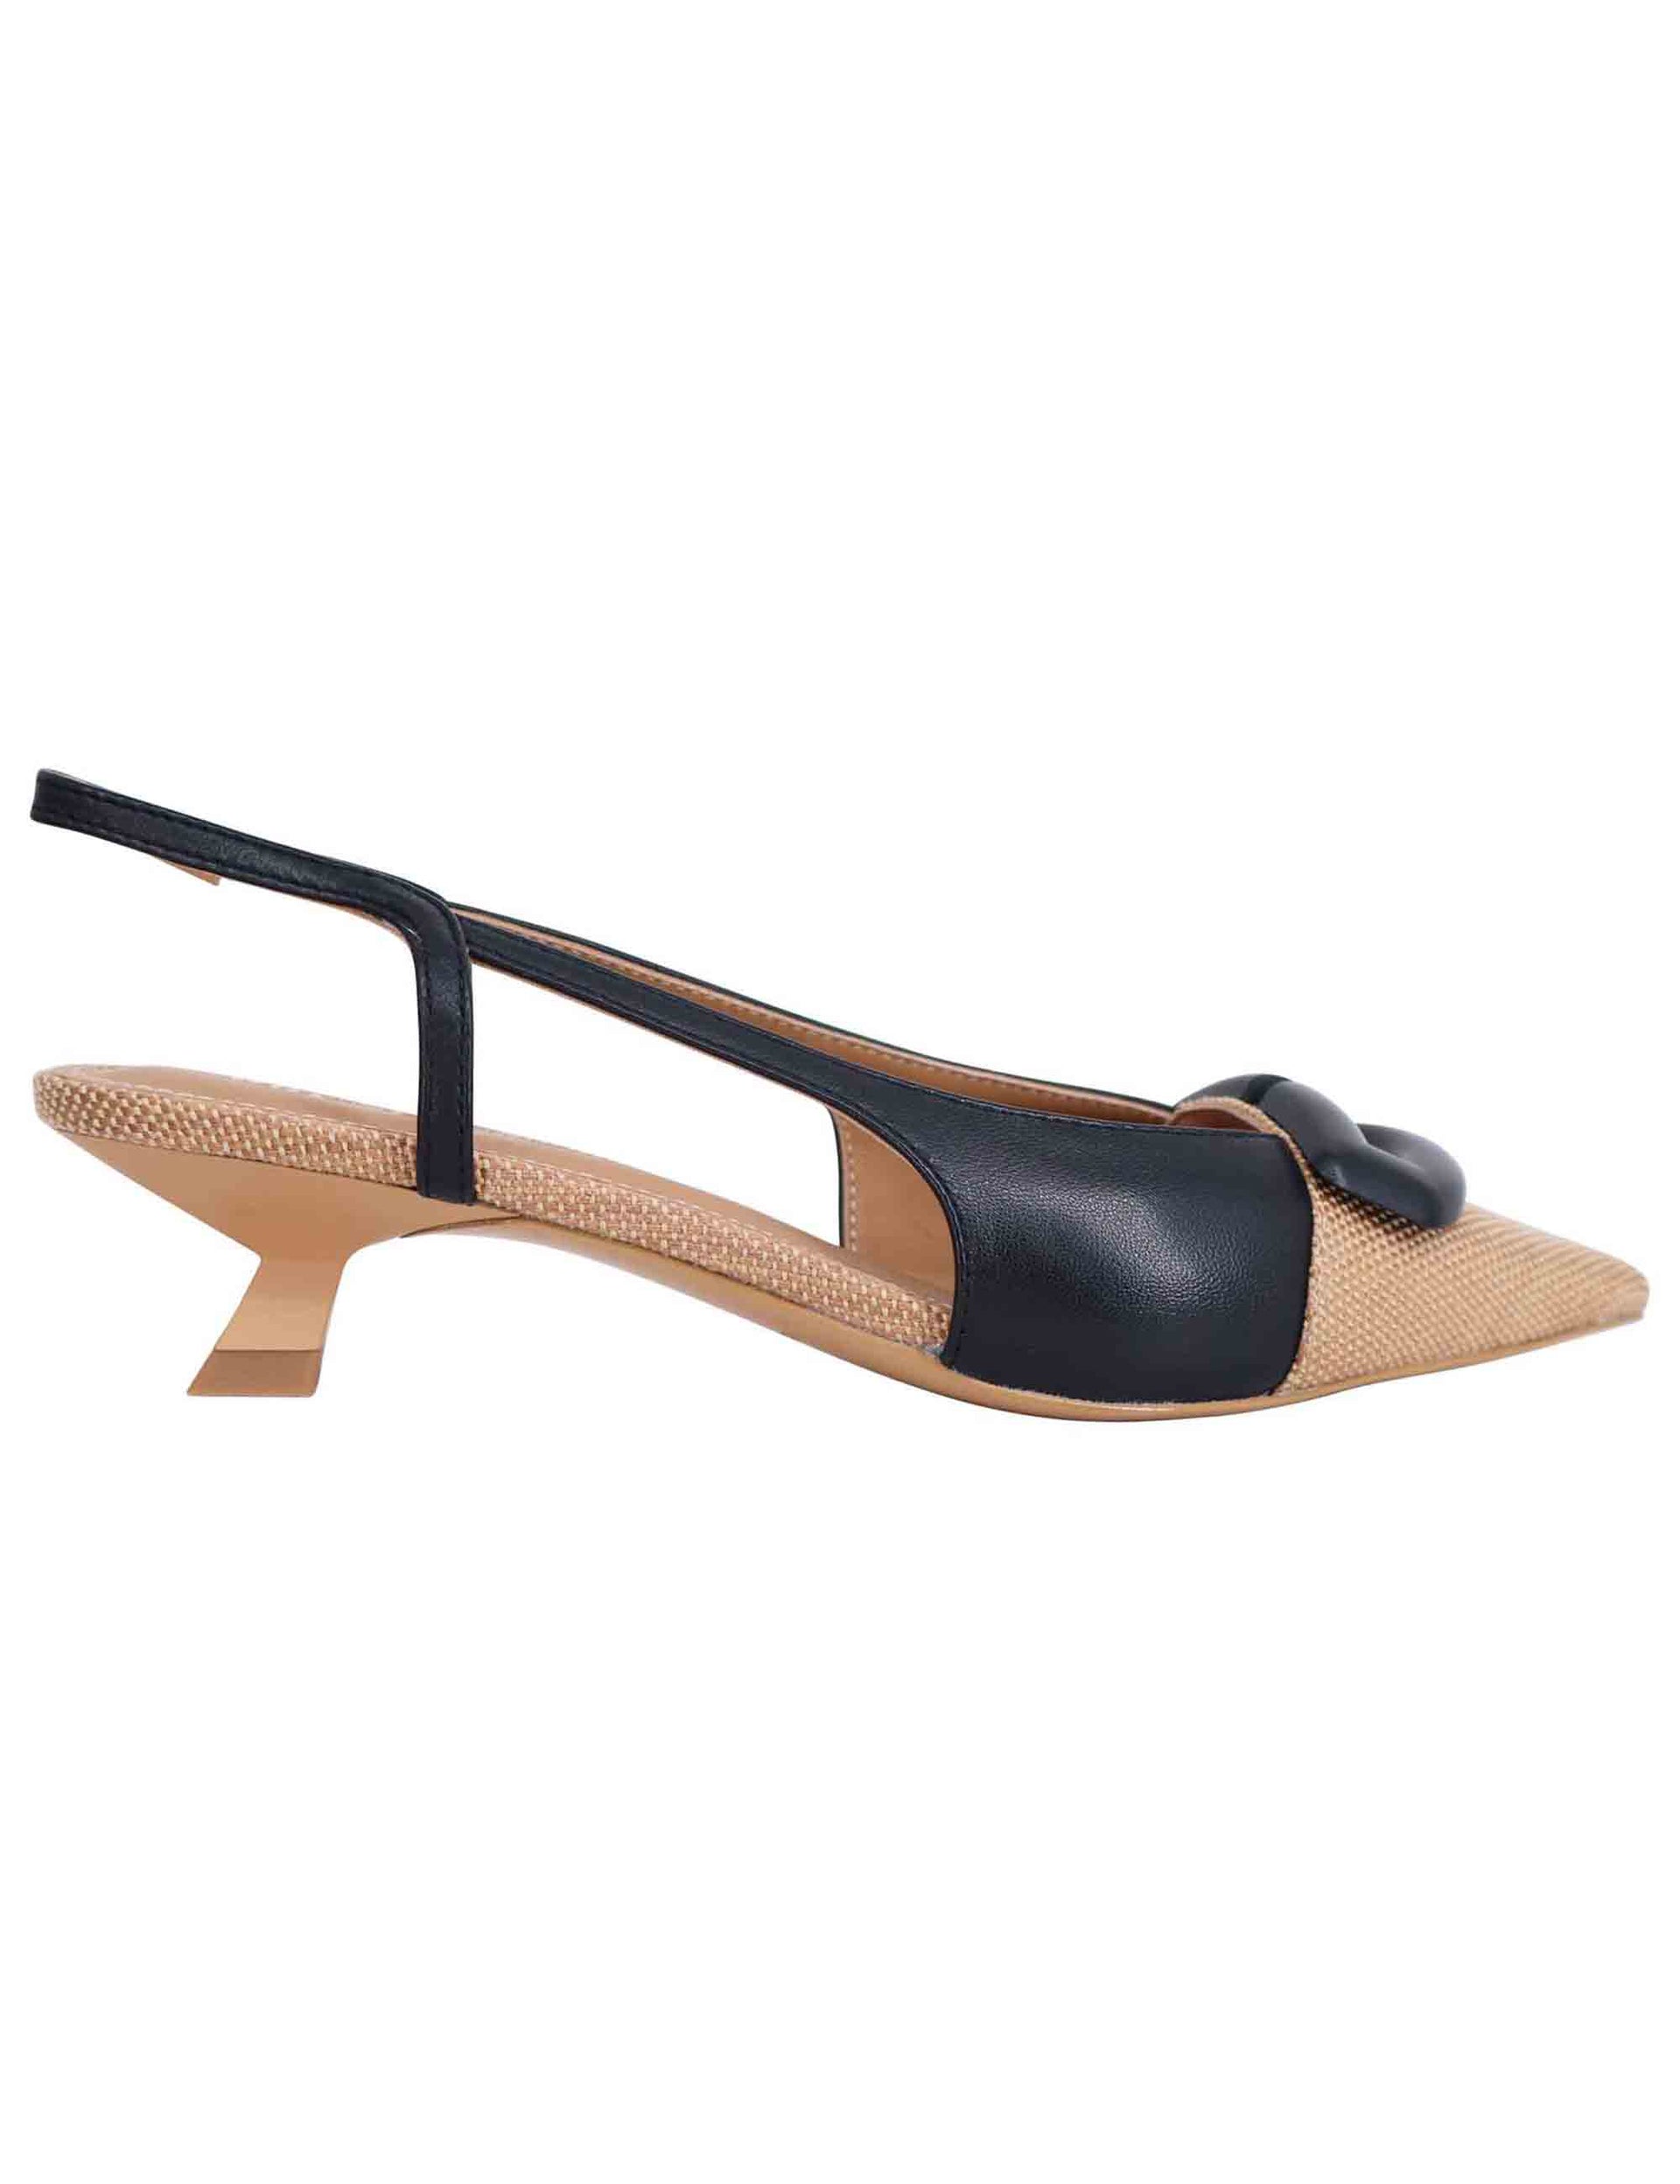 Women's slingback pumps in beige fabric and black leather with low heel